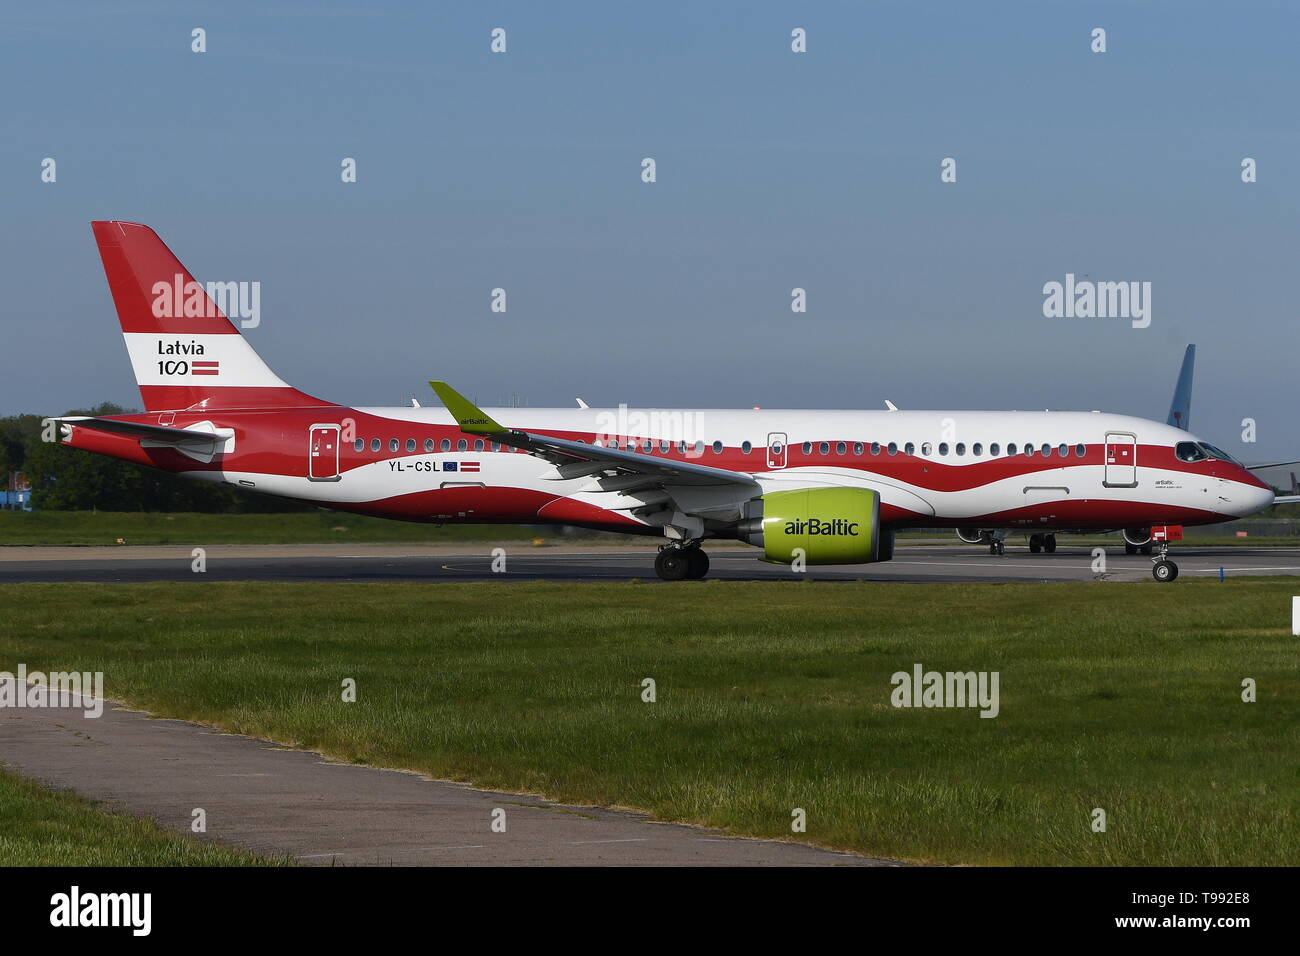 AIR BALTIC AIRBUS A220-300 (BOMBARDIER CS300) YL-CSL IN 'LATVIA 100' SPECIAL LIVERY. Stock Photo